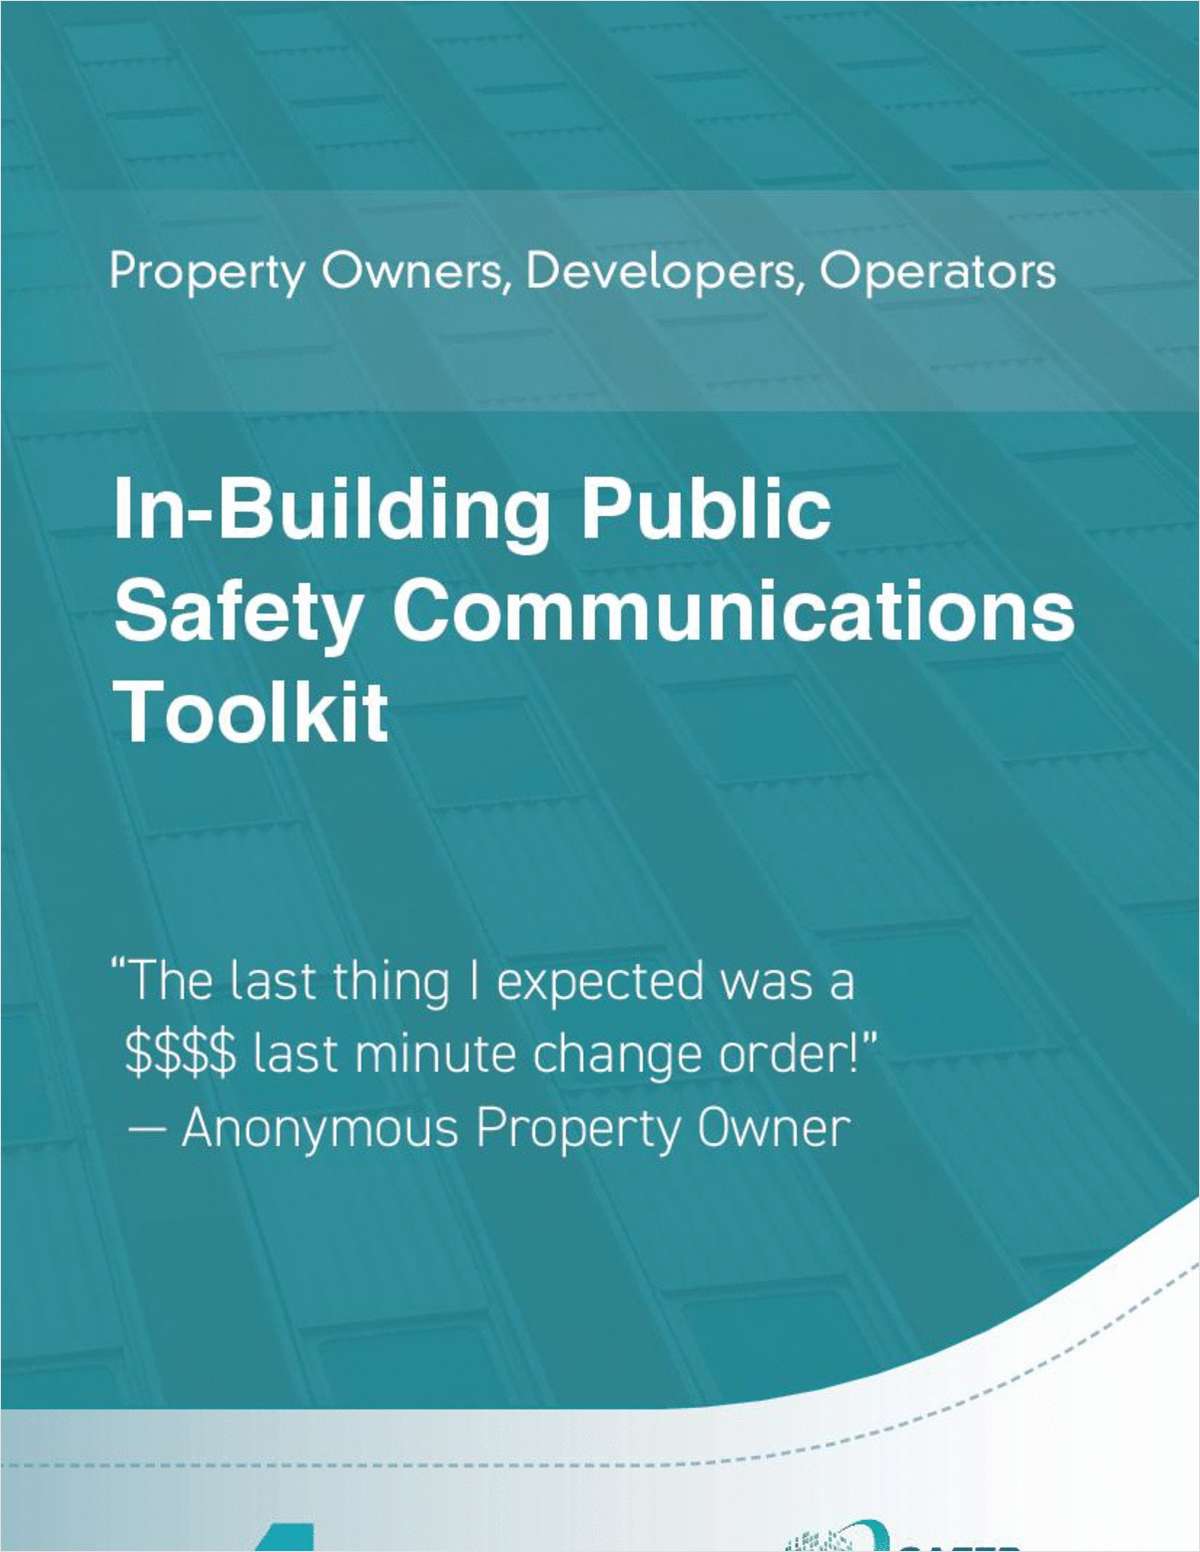 IN-BUILDING SIGNAL COVERAGE TOOLKIT: For property owners, developers and operators